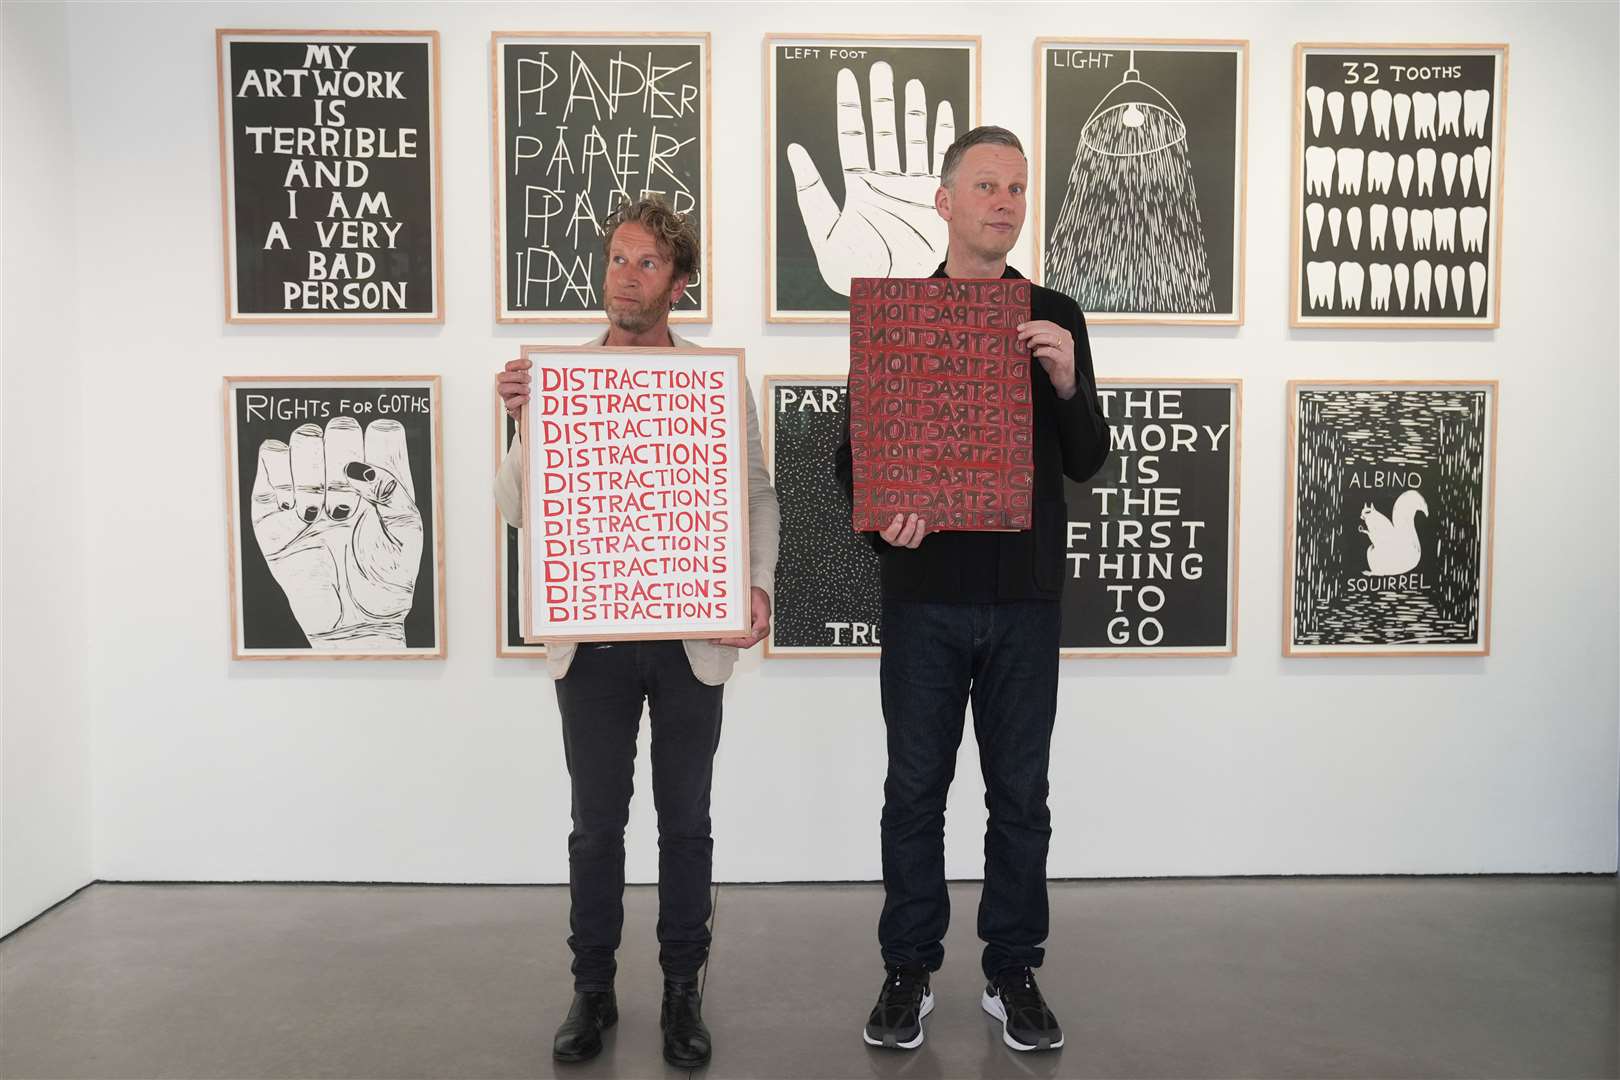 Michael Schafer (left) and David Shrigley at the Jealous Gallery in Shoreditch, London (Lucy North/PA)